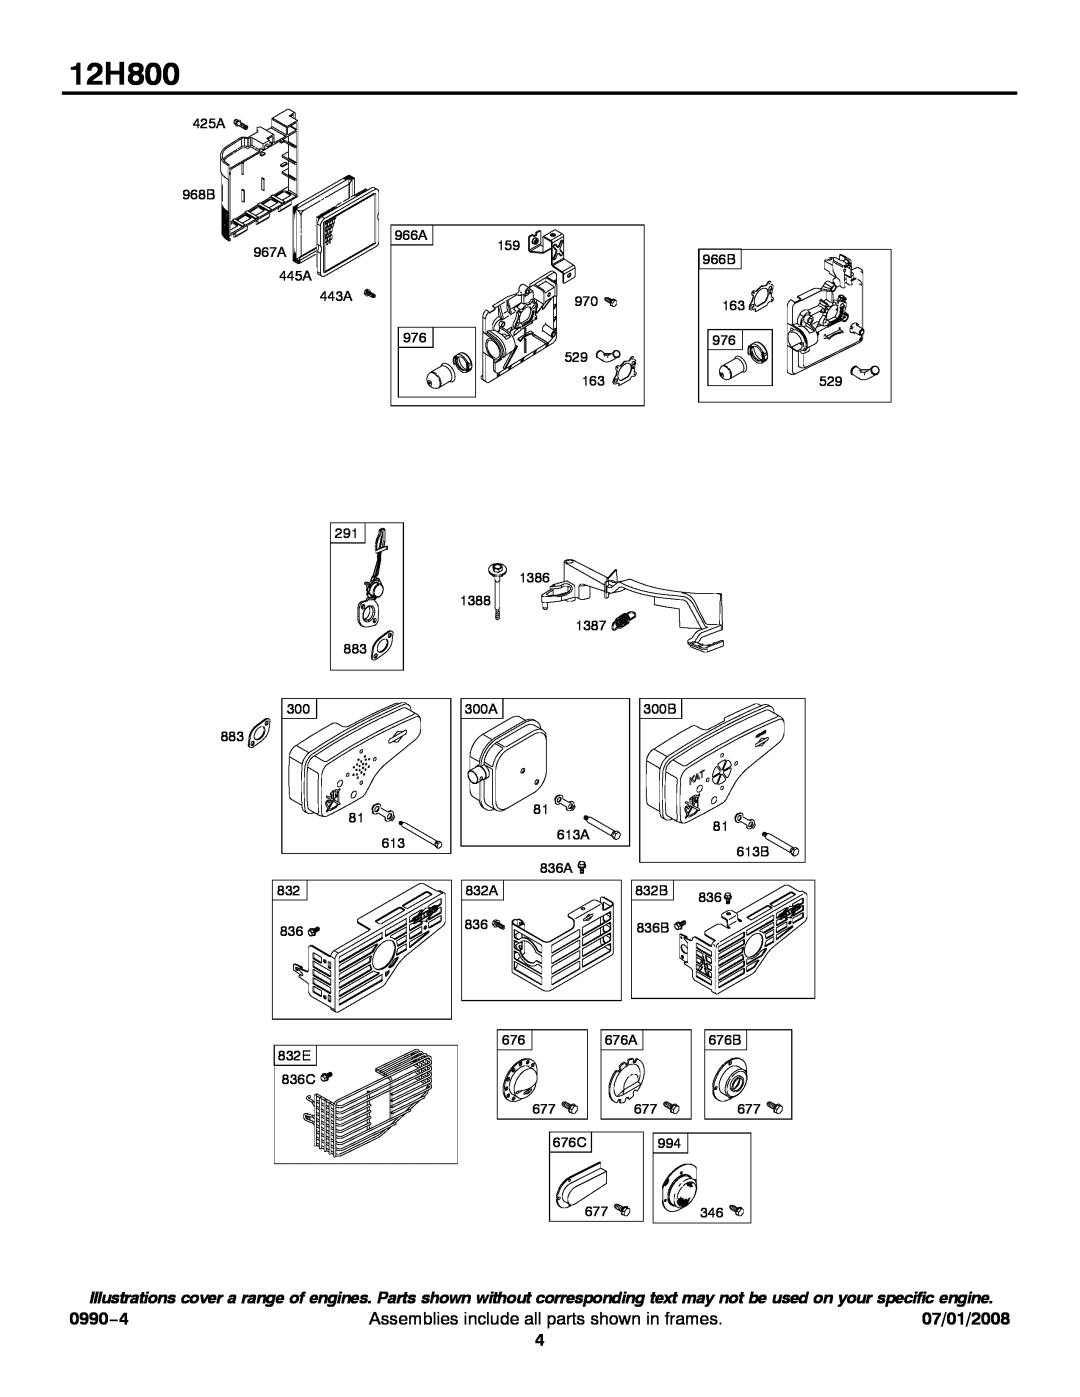 Briggs & Stratton 12H800 service manual 0990−4, Assemblies include all parts shown in frames, 07/01/2008 